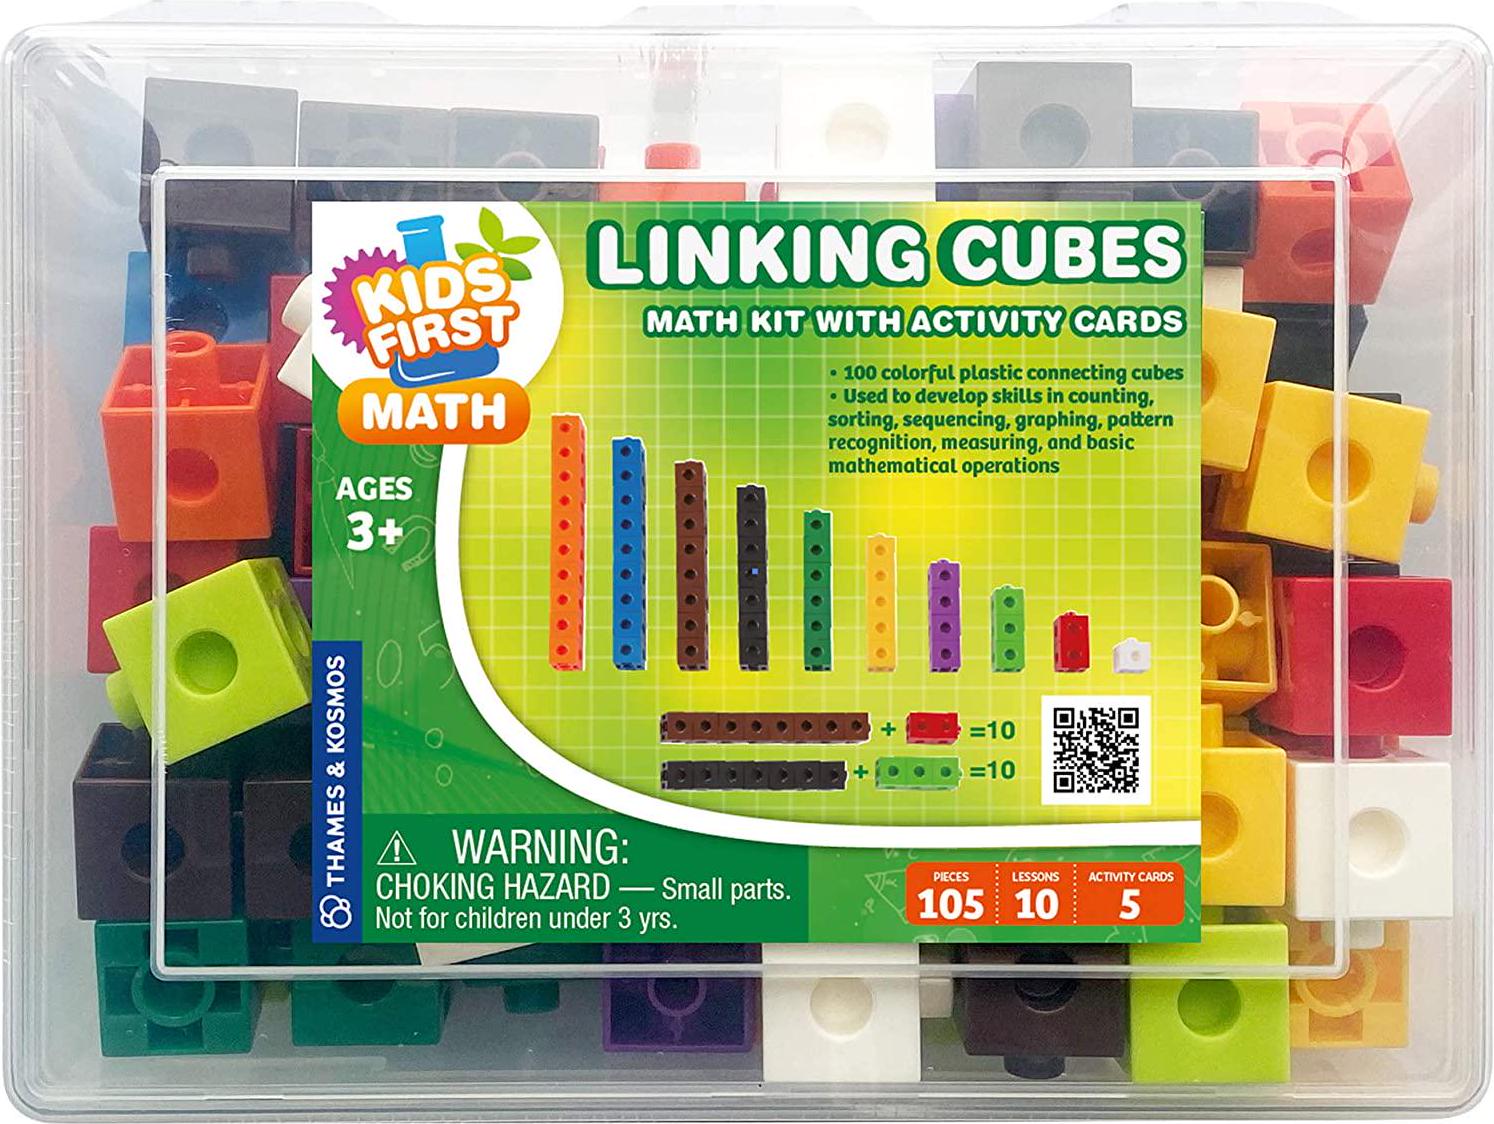 THAMES & KOSMOS, Kids First Math: 100 Linking Cubes Math Kit w/ Activity Cards | Develop Skills in Counting, Sorting, Sequencing, Graphing, Measuring | Visual Hands-on Math for at-Home or Classroom Learning Ages 3+